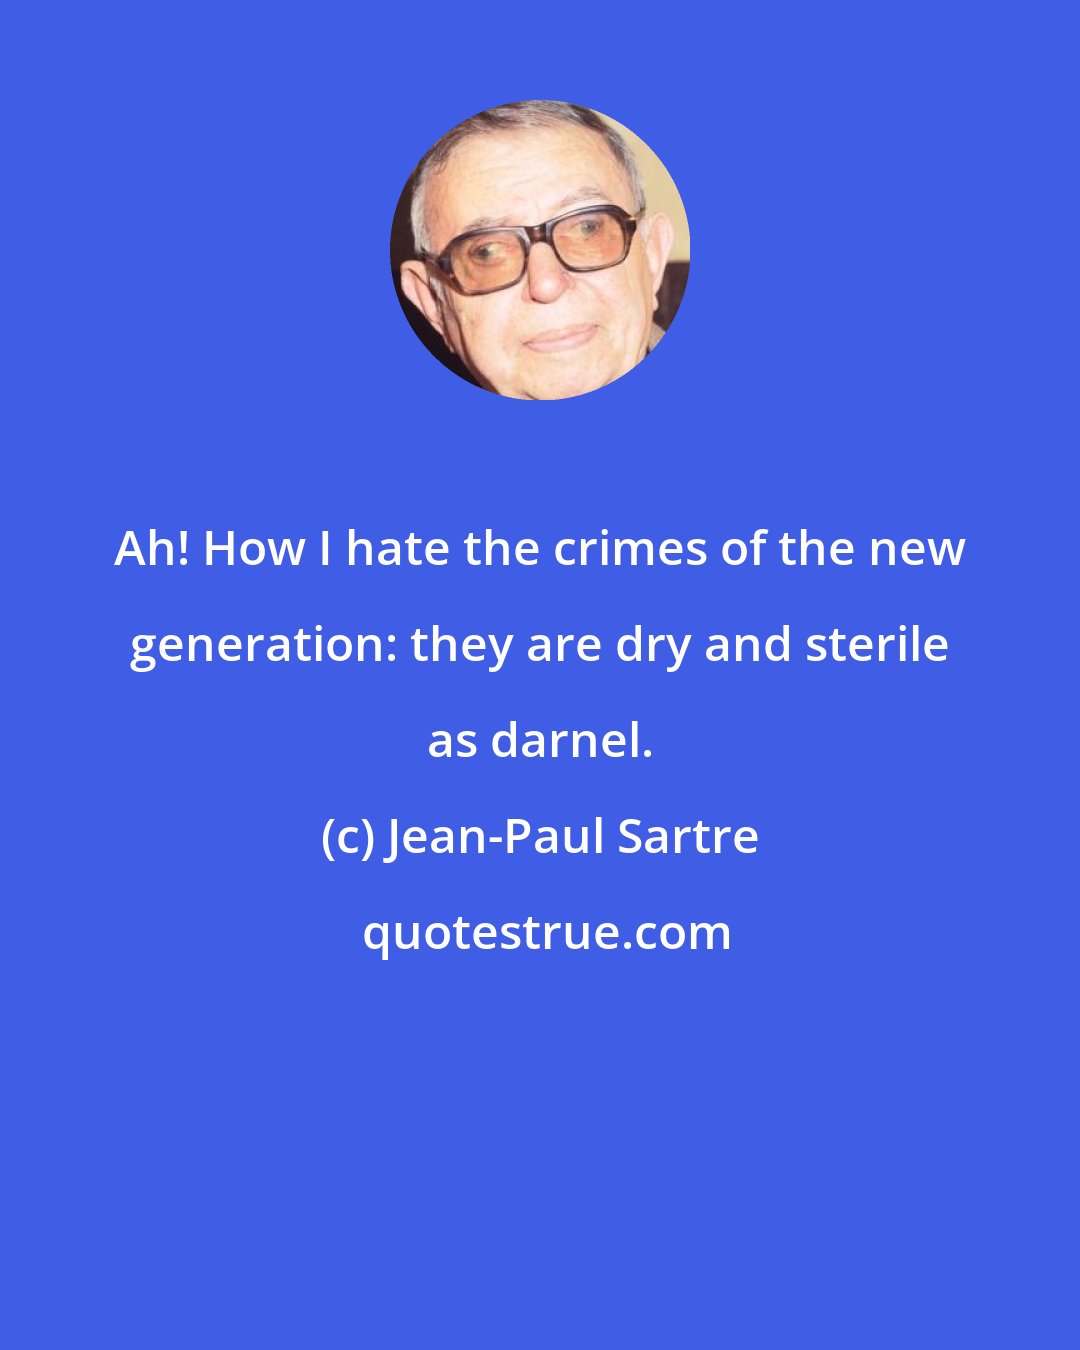 Jean-Paul Sartre: Ah! How I hate the crimes of the new generation: they are dry and sterile as darnel.